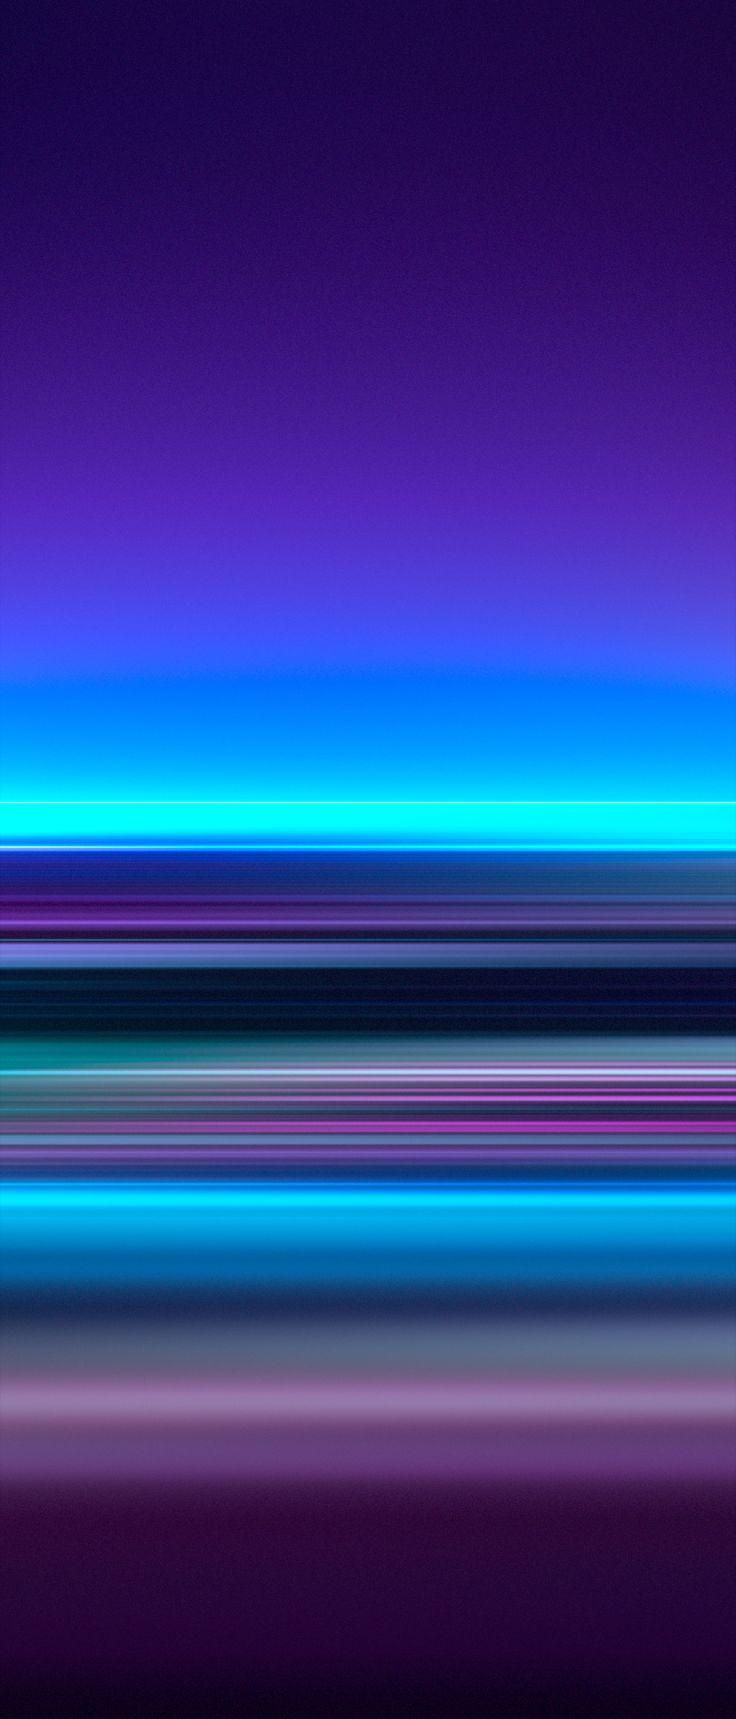 Abstract Illustration Of A Neon Blue Luminescence Stock Photo, Picture And  Royalty Free Image. Image 5204908.